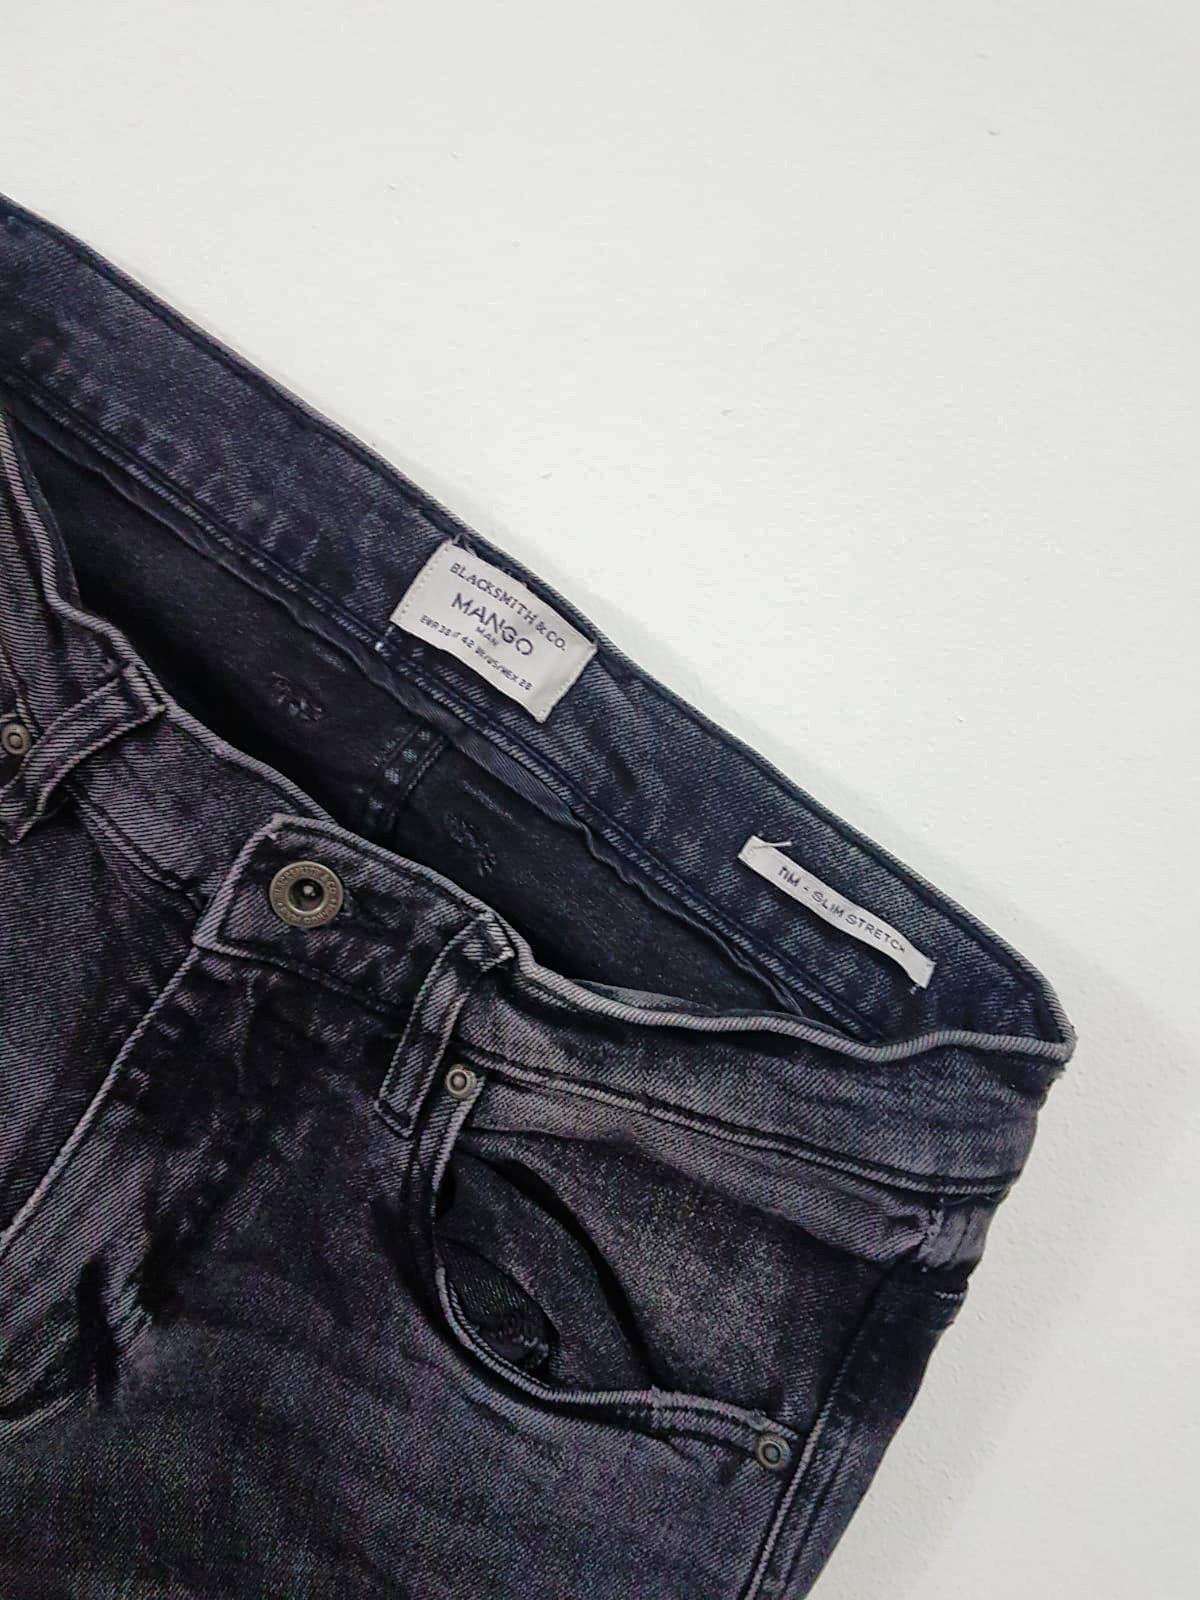 united colors of benetton carrot fit jeans